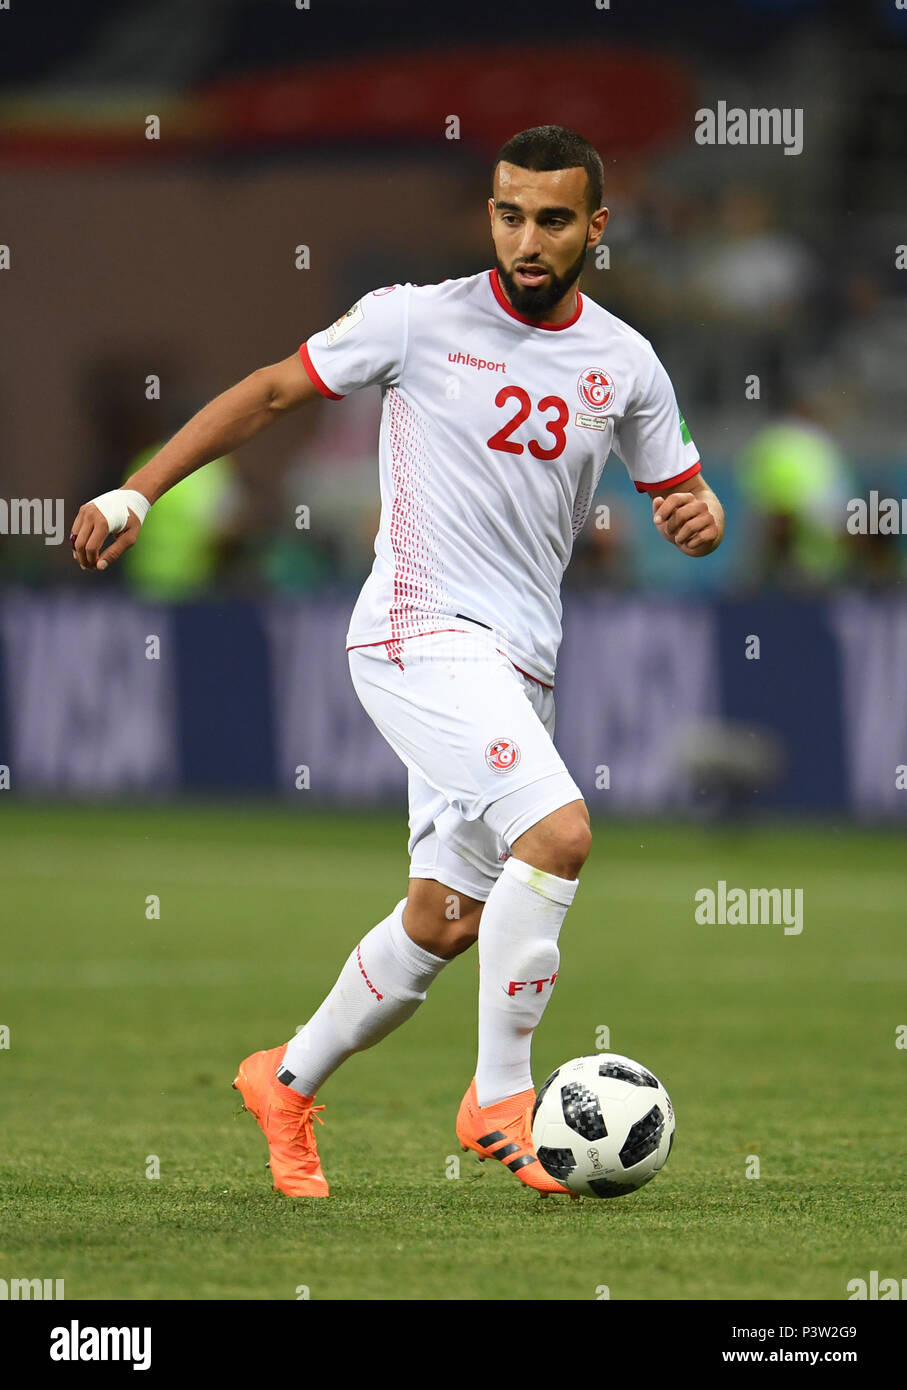 Volgograd, Russia. 18th June, 2018. Soccer: World Cup, Tunisia vs England, group stages, group G, Volgograd Stadium. Tunisia's Naim Sliti in action. Credit: Andreas Gebert/dpa/Alamy Live News Stock Photo